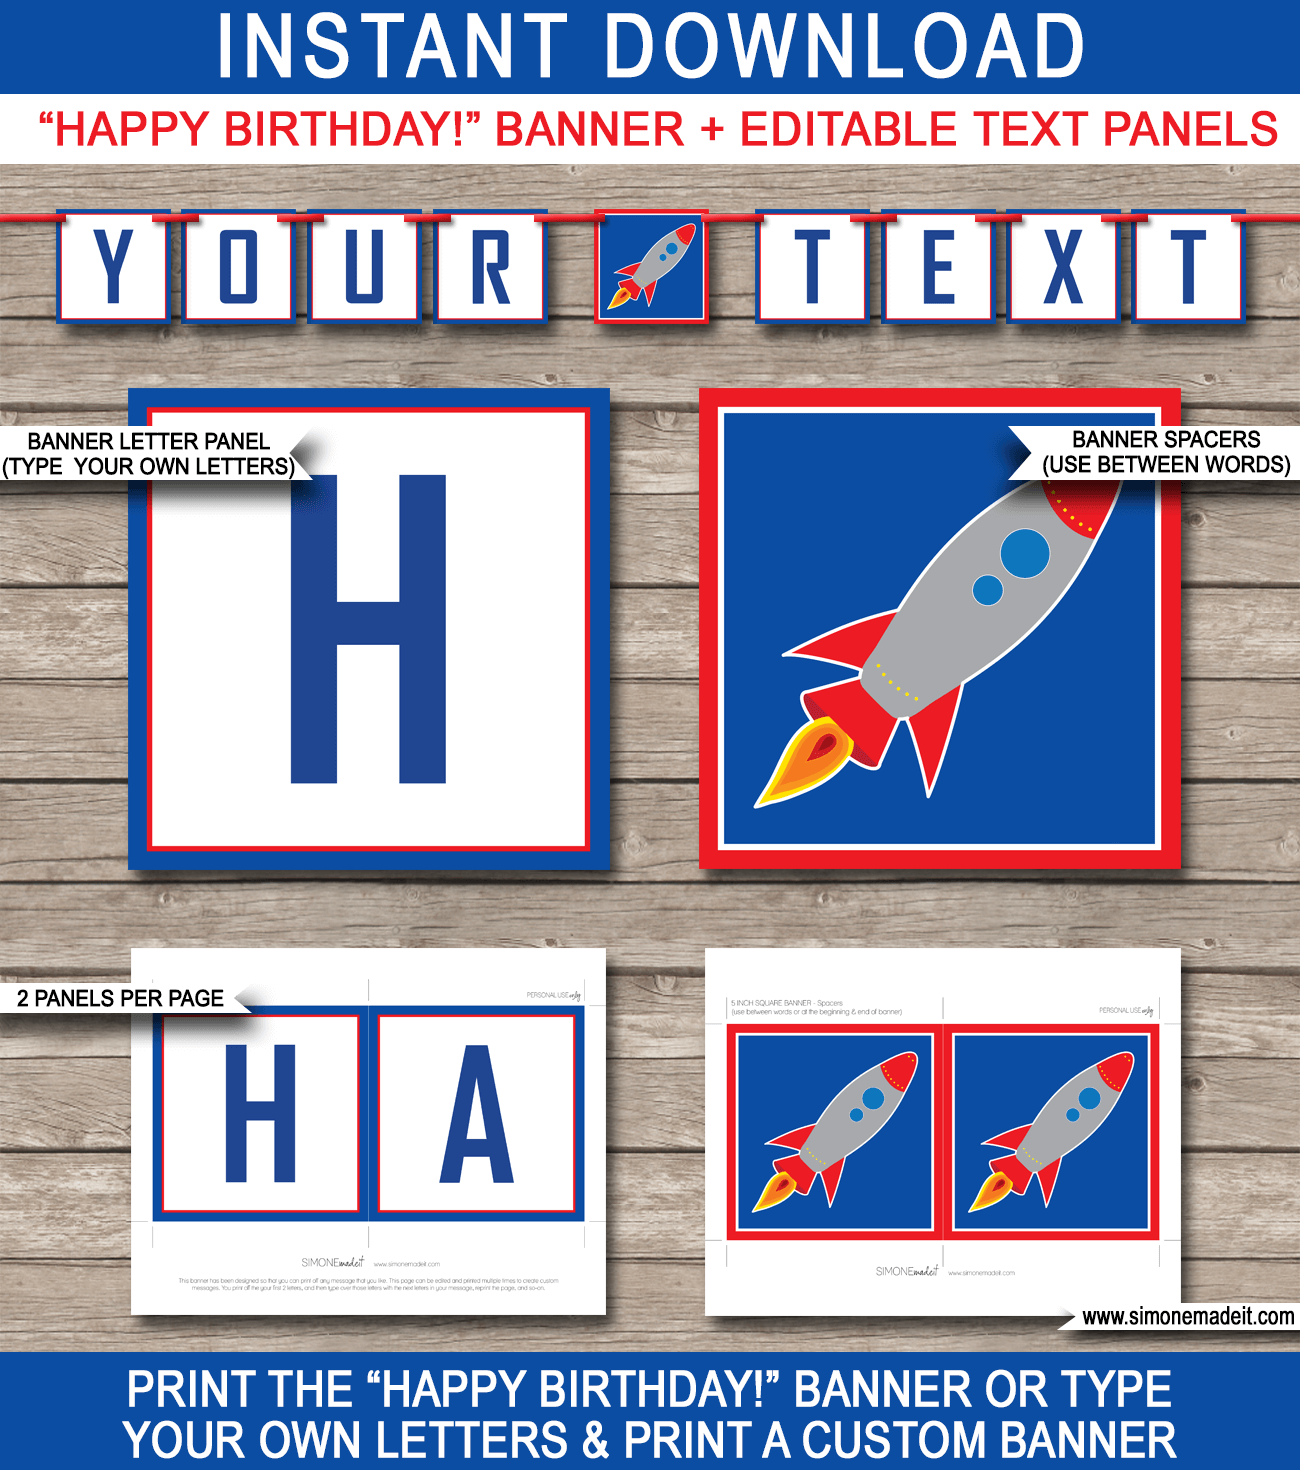 Space Party Banner Template - Happy Birthday Bunting - Editable and Printable DIY Template - INSTANT DOWNLOAD $4.50 via simonemadeit.com